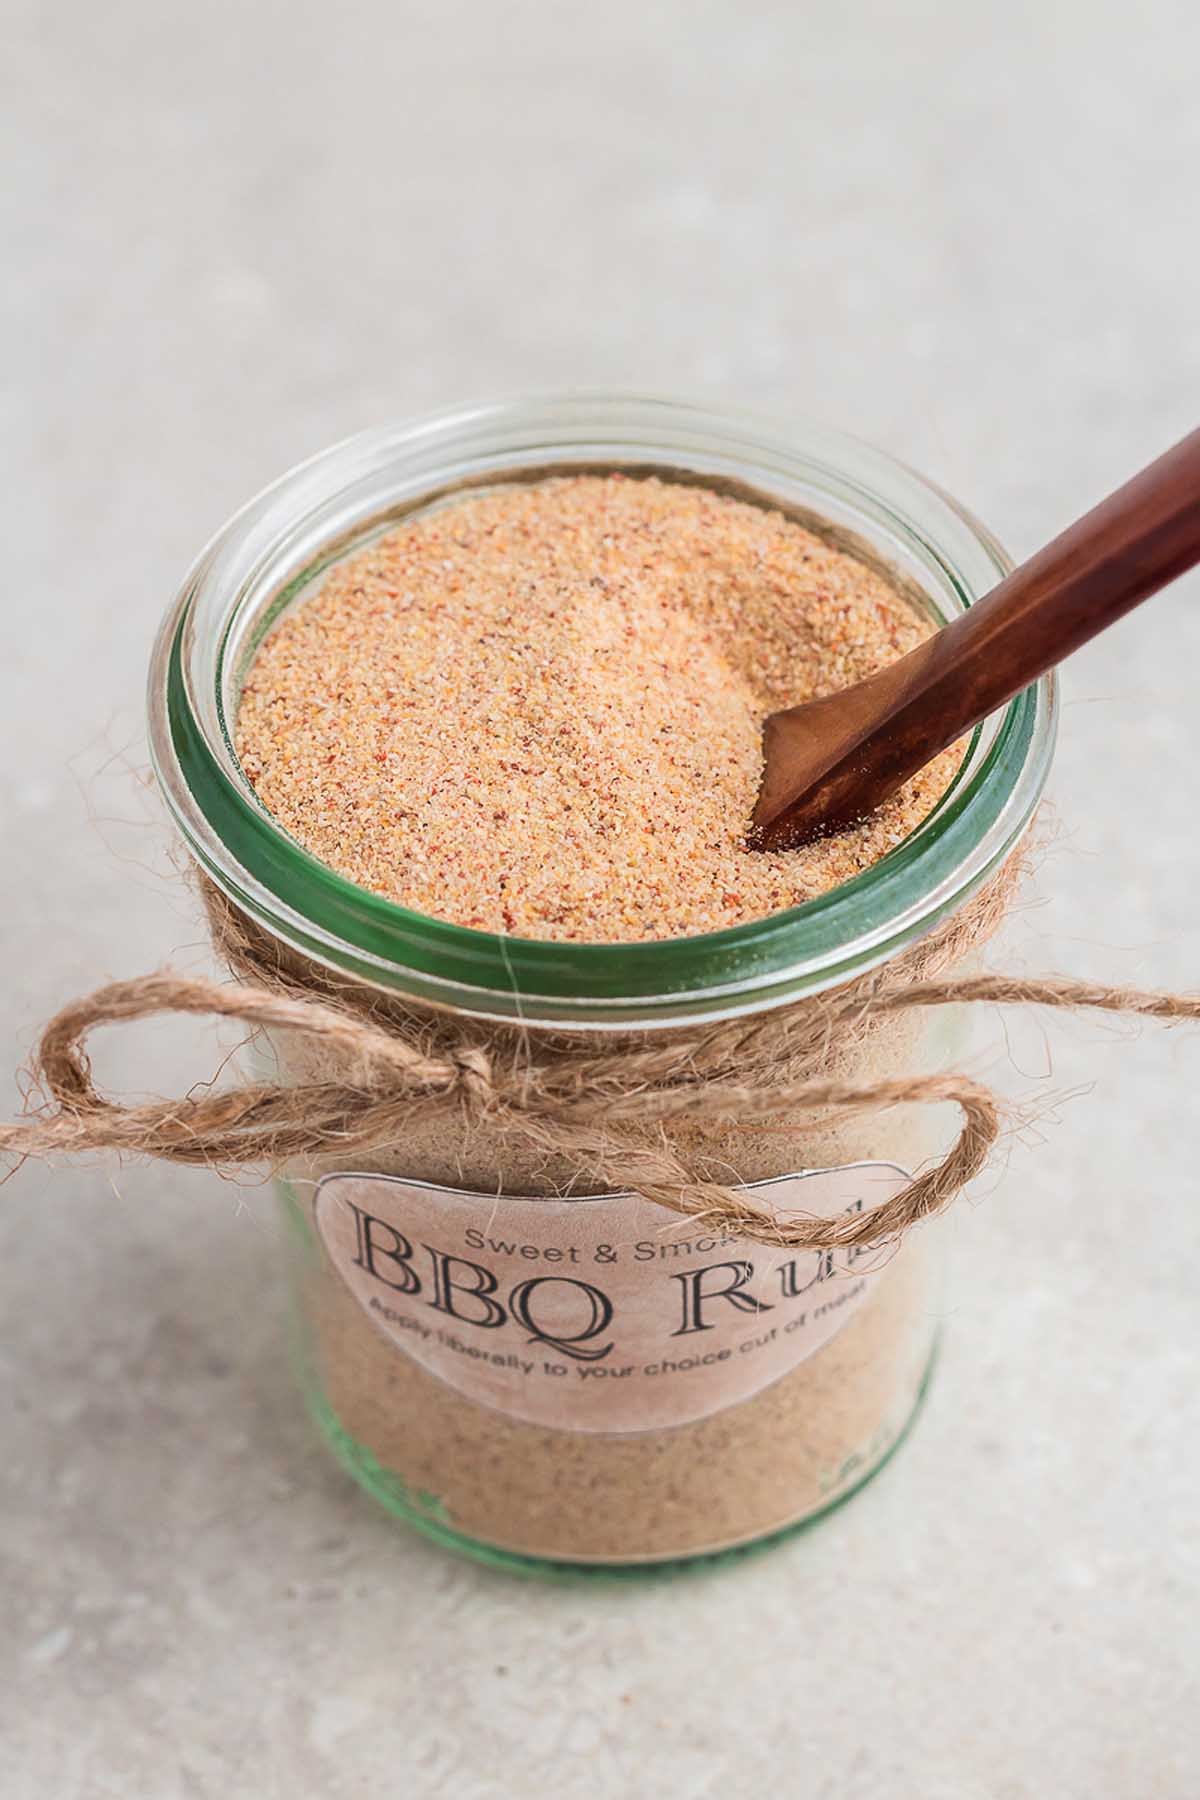 How to Use a BBQ Spice Rub